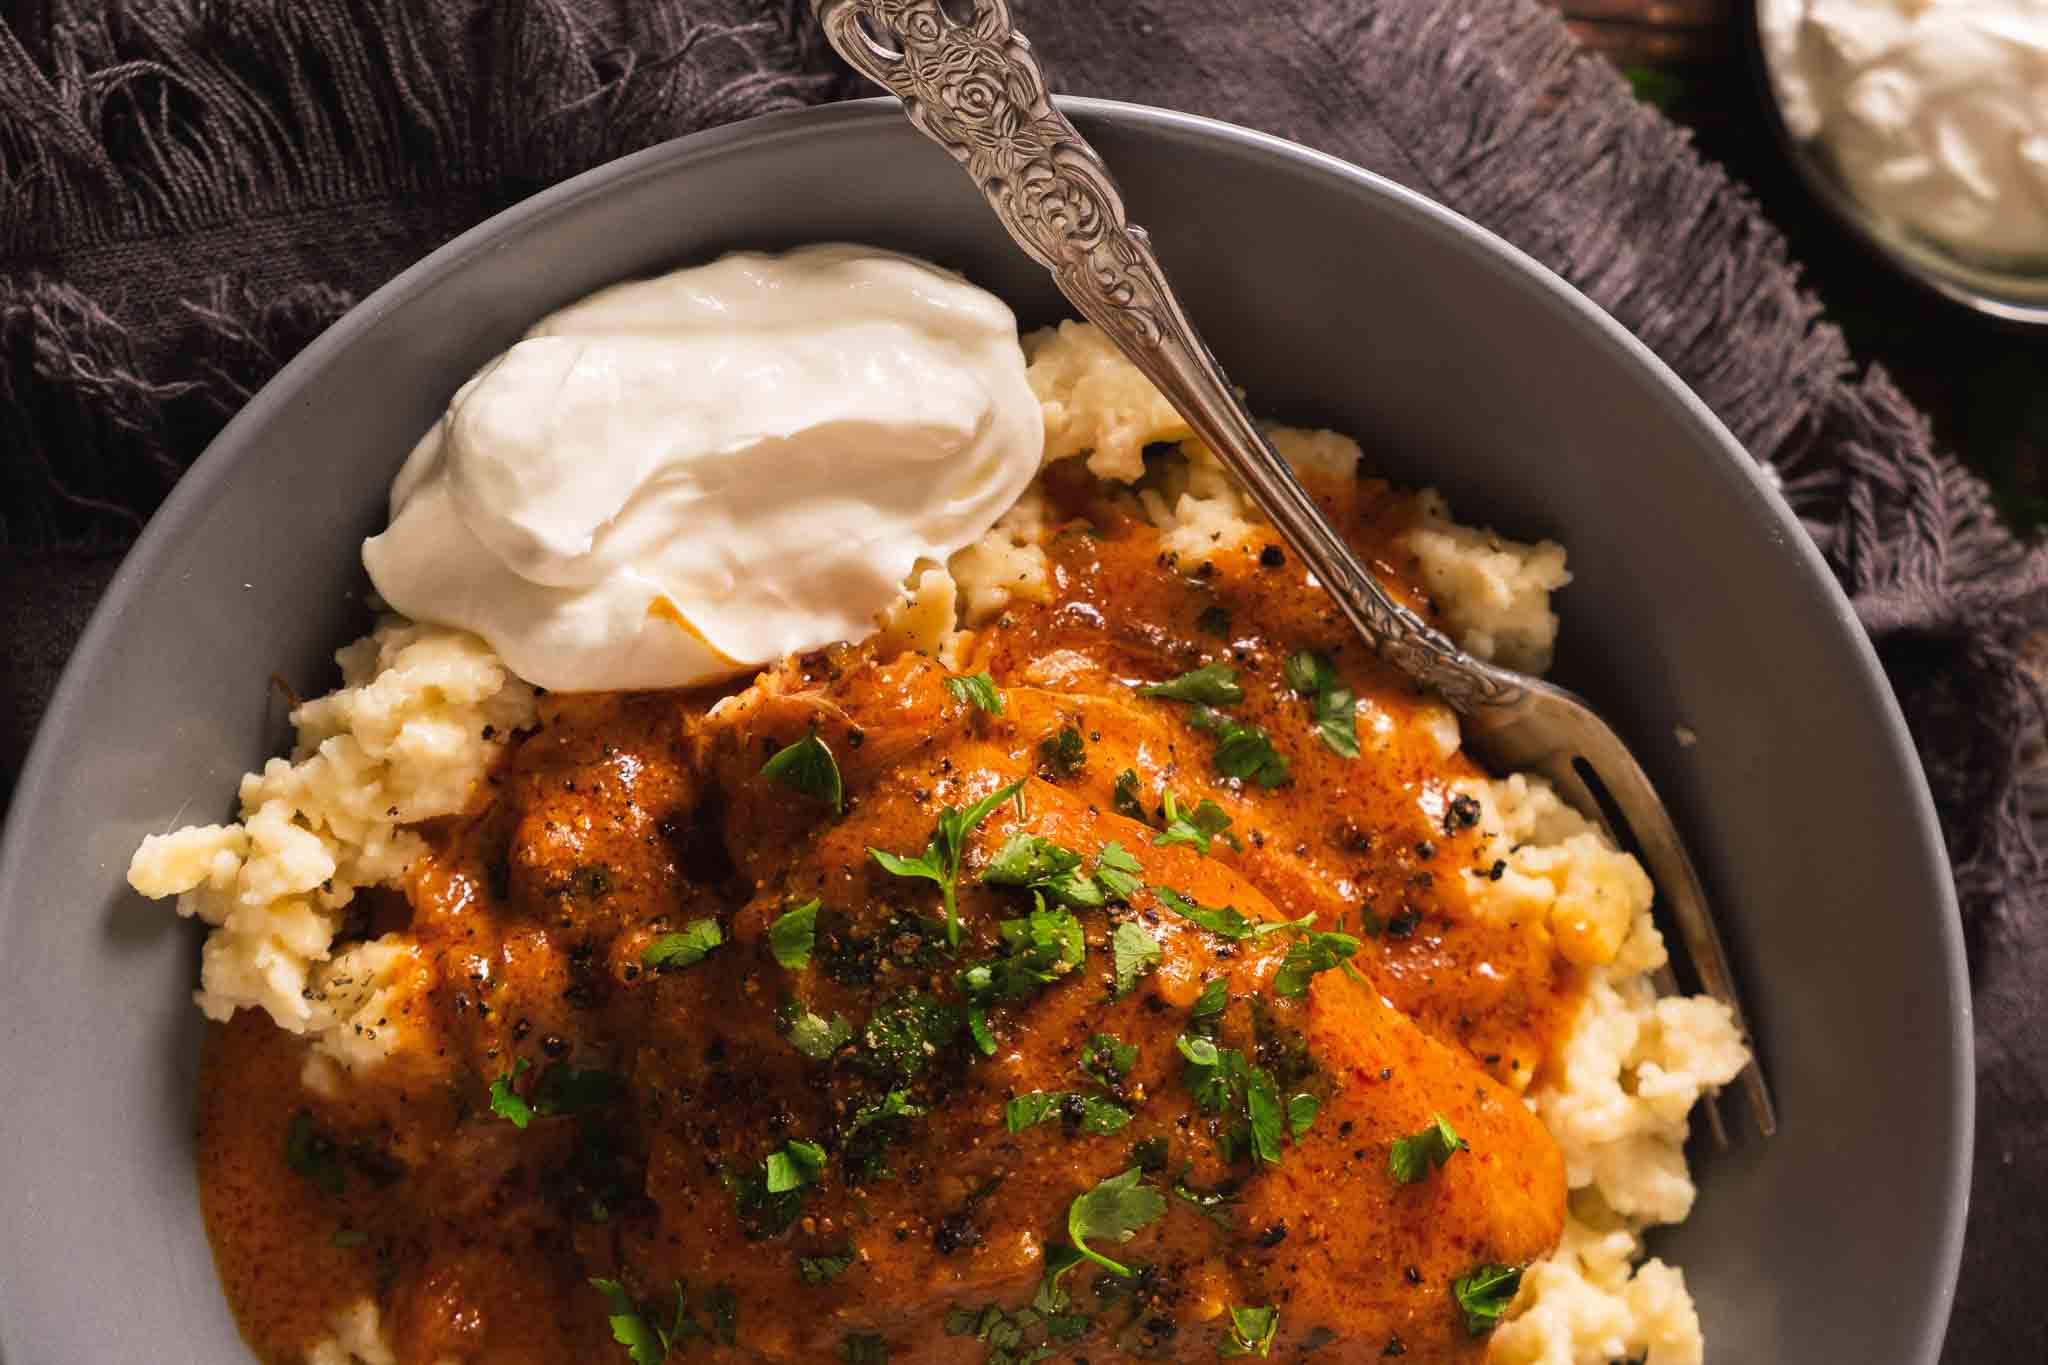 Chicken paprikash on top of spaetzle or nokedli on a plate with a dollop of sour cream on the side.